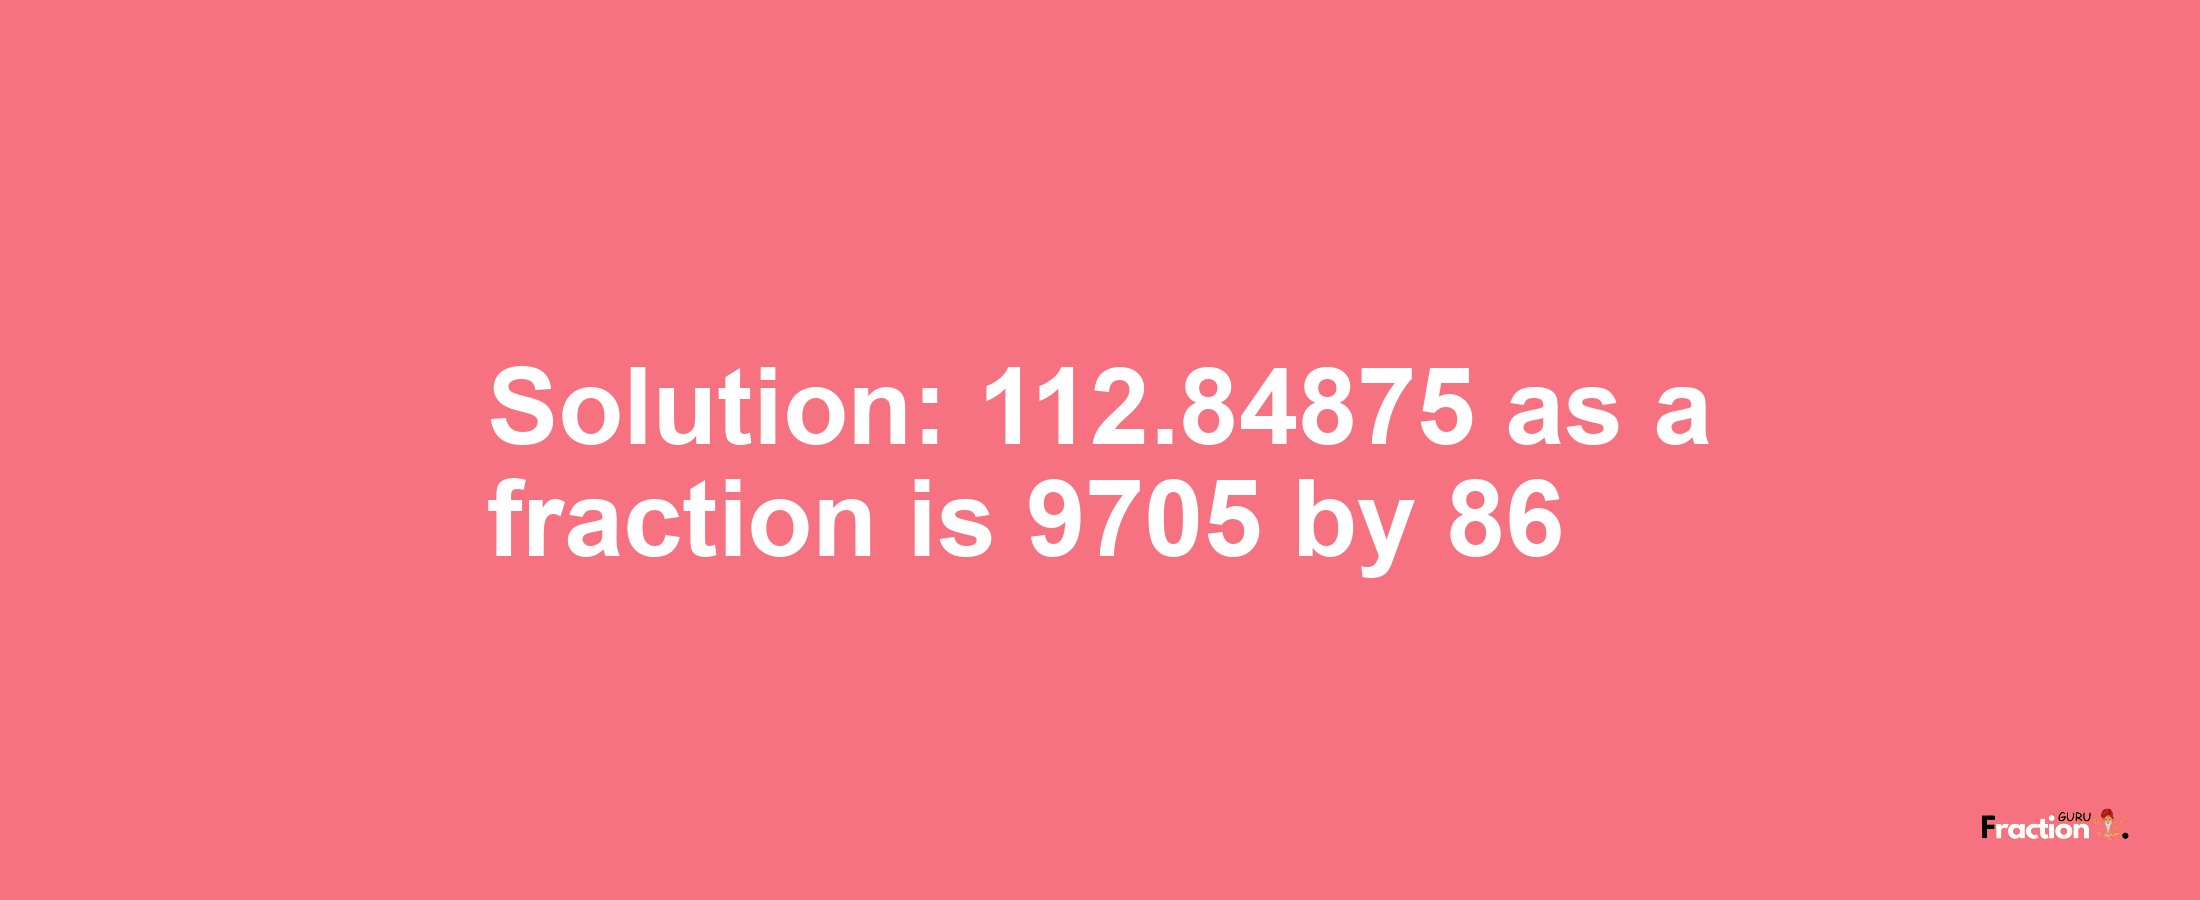 Solution:112.84875 as a fraction is 9705/86